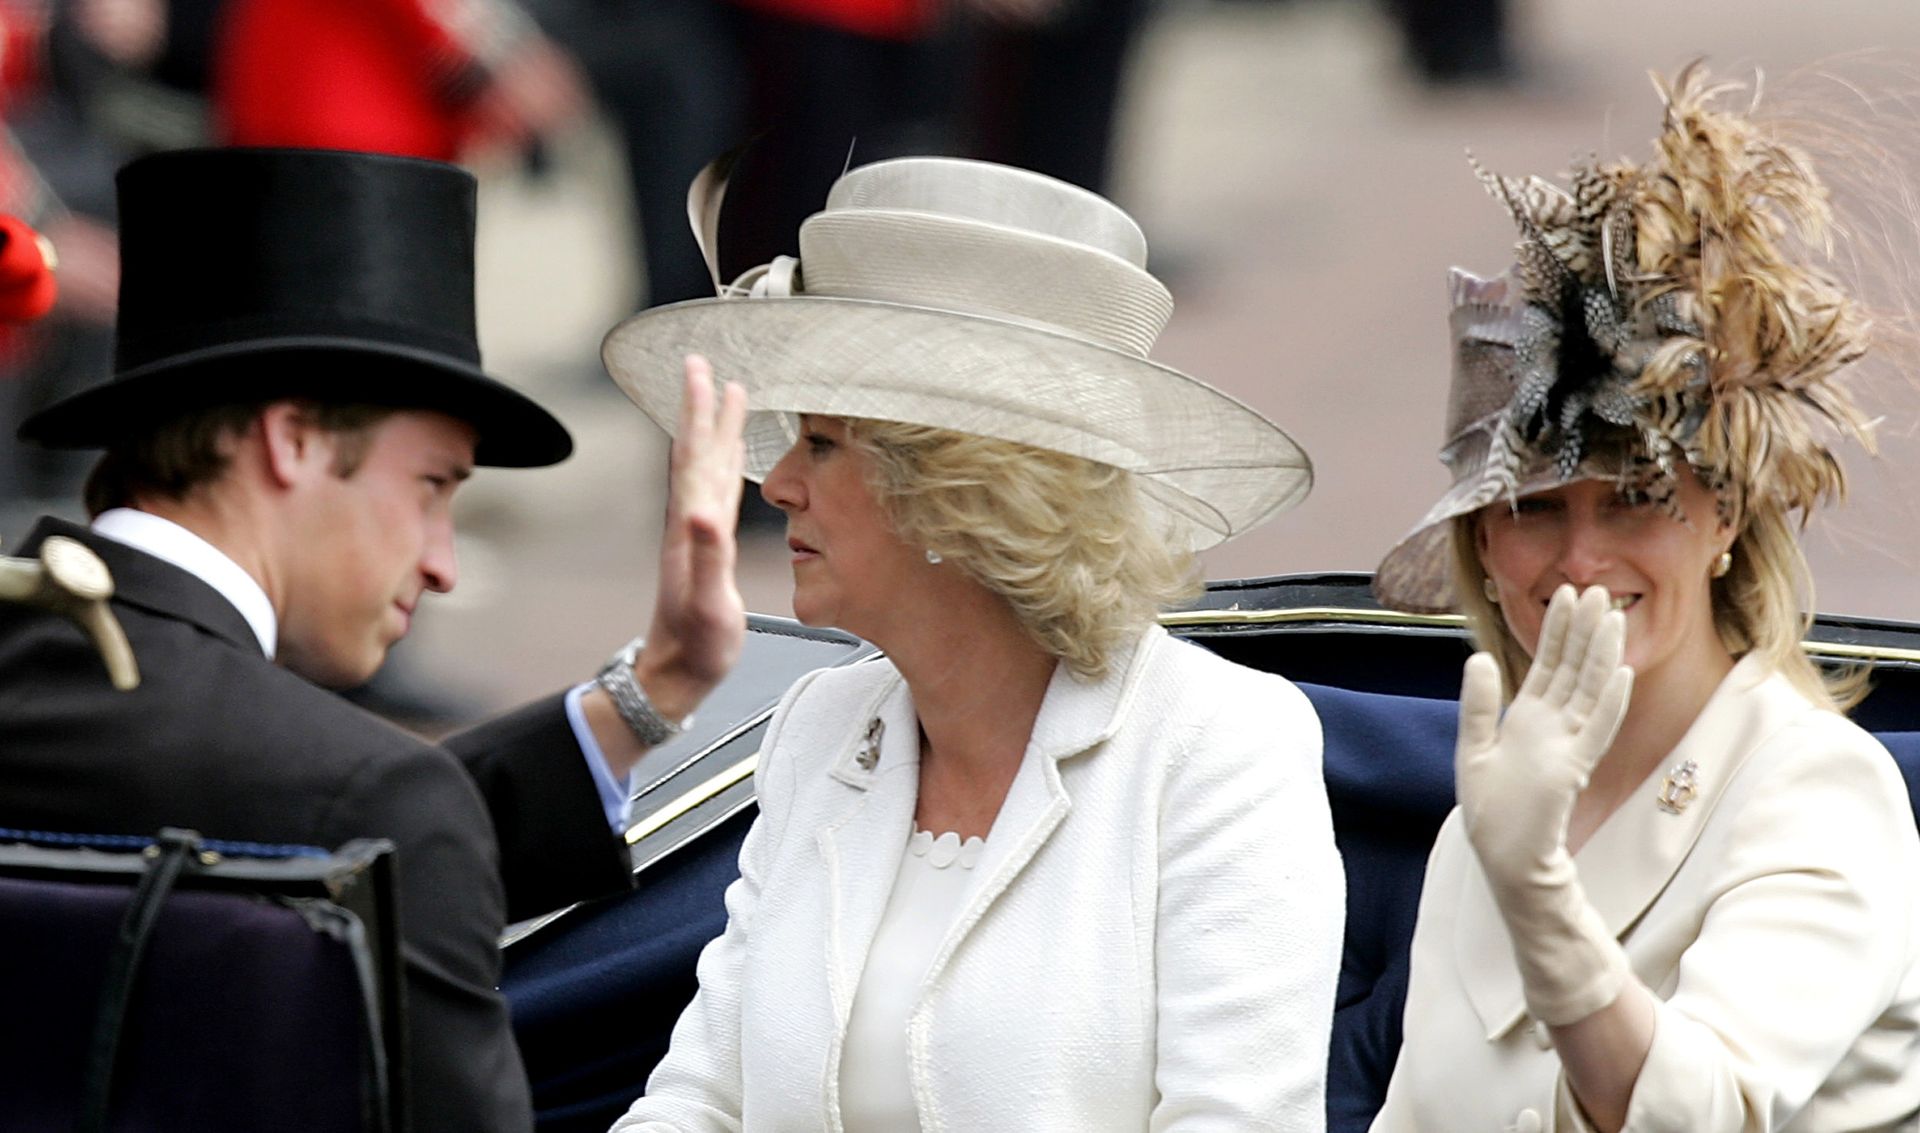 Camilla trooping the colour